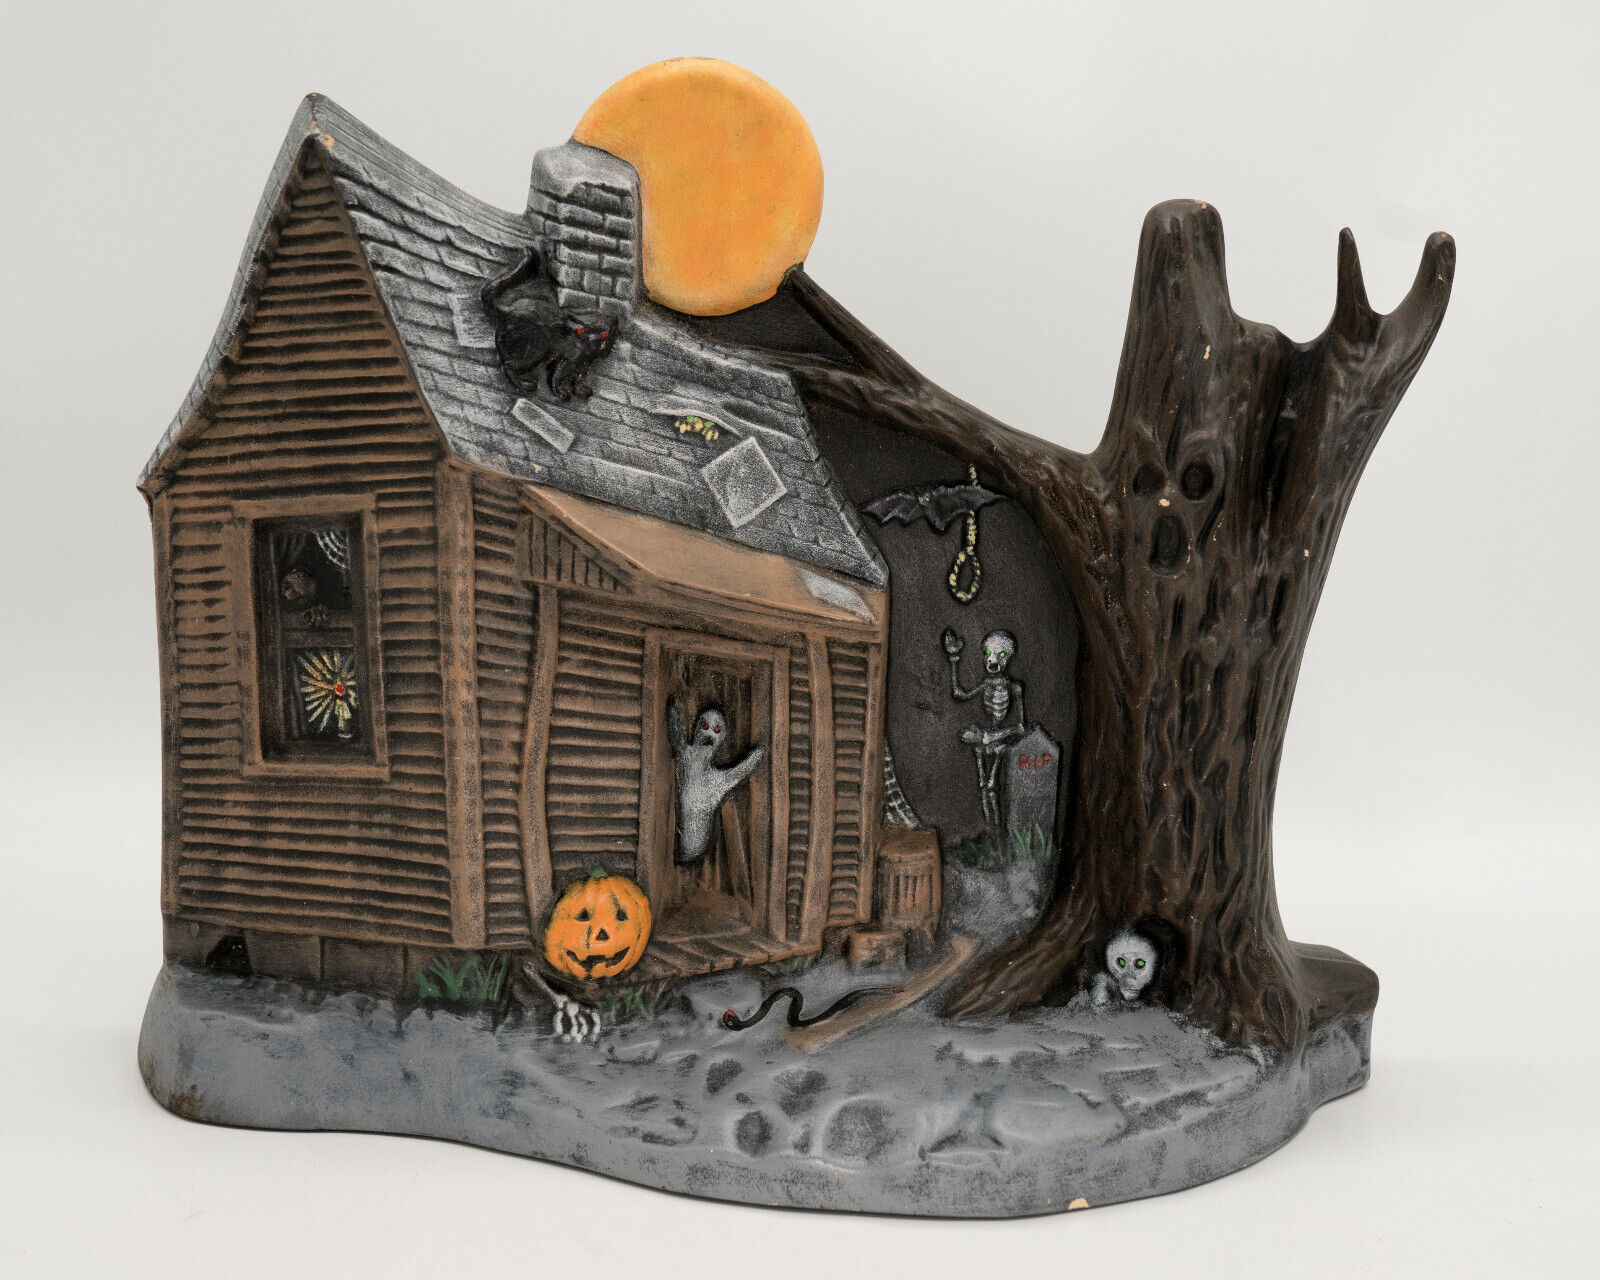 Vintage 70s Halloween Kimple Mold Haunted House Ceramic Non Lighted Indoor Decor